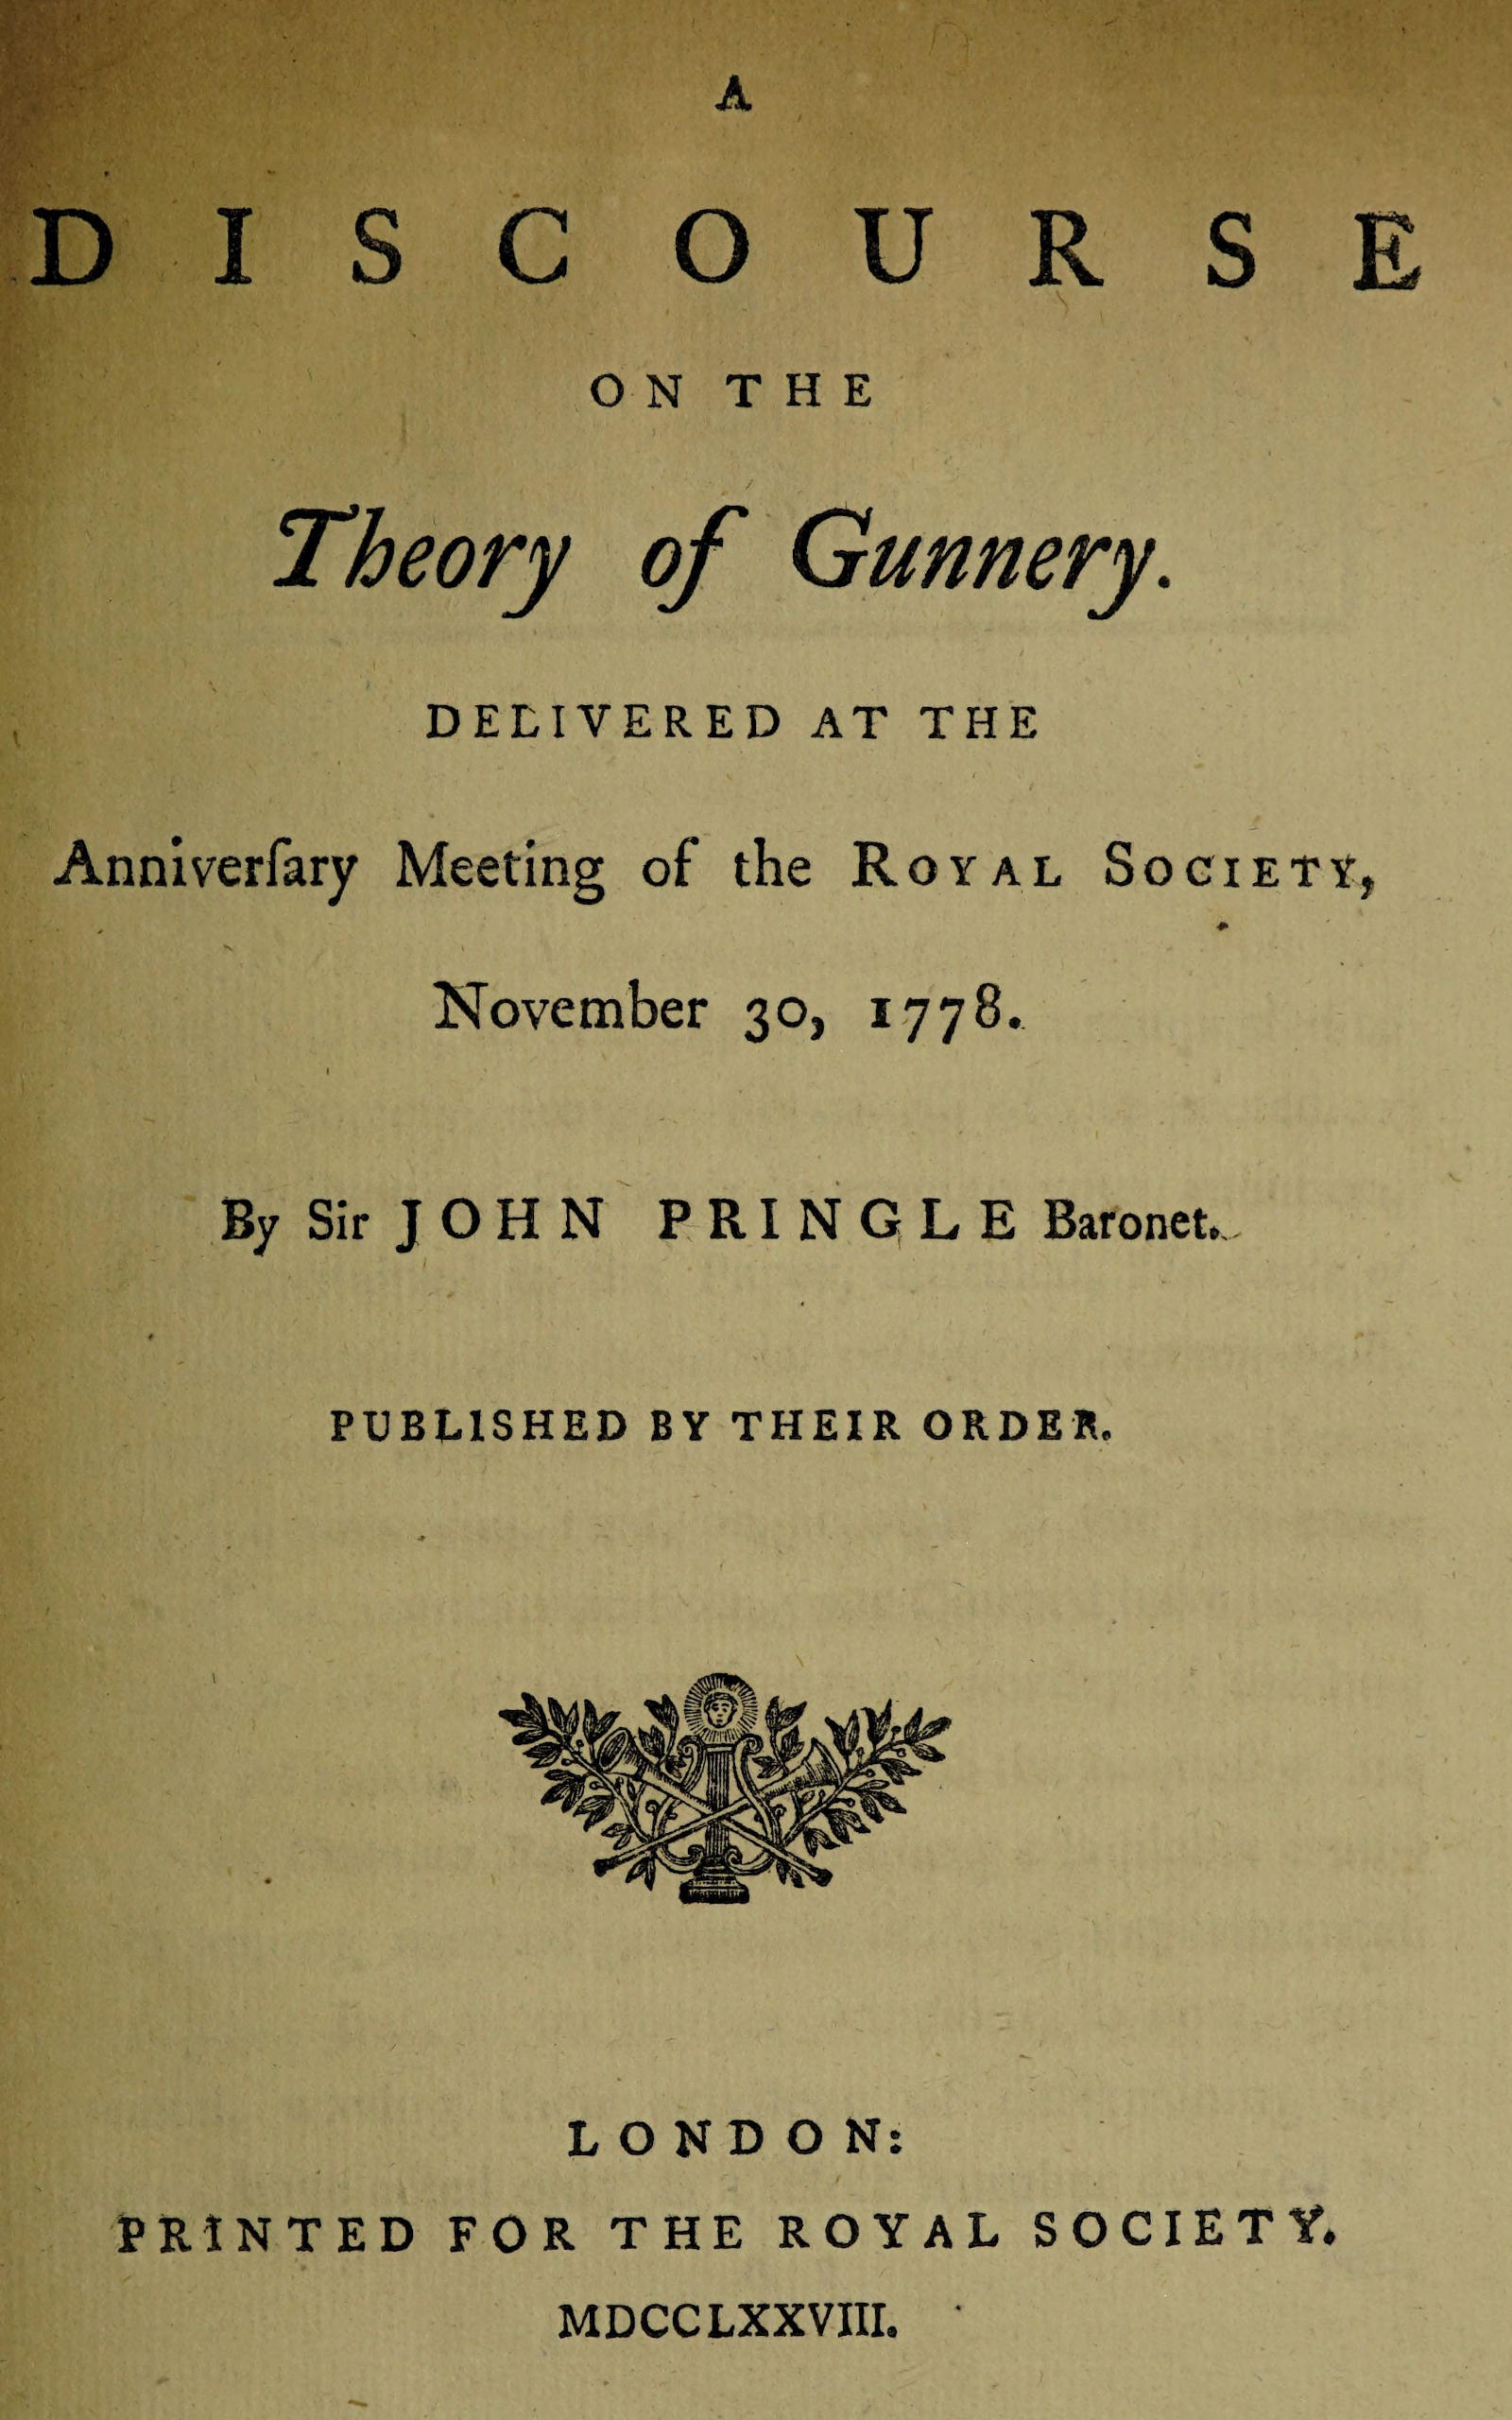 A discourse on the theory of gunnery&#10;Delivered at the anniversary meeting of the Royal Society, November 30, 1778